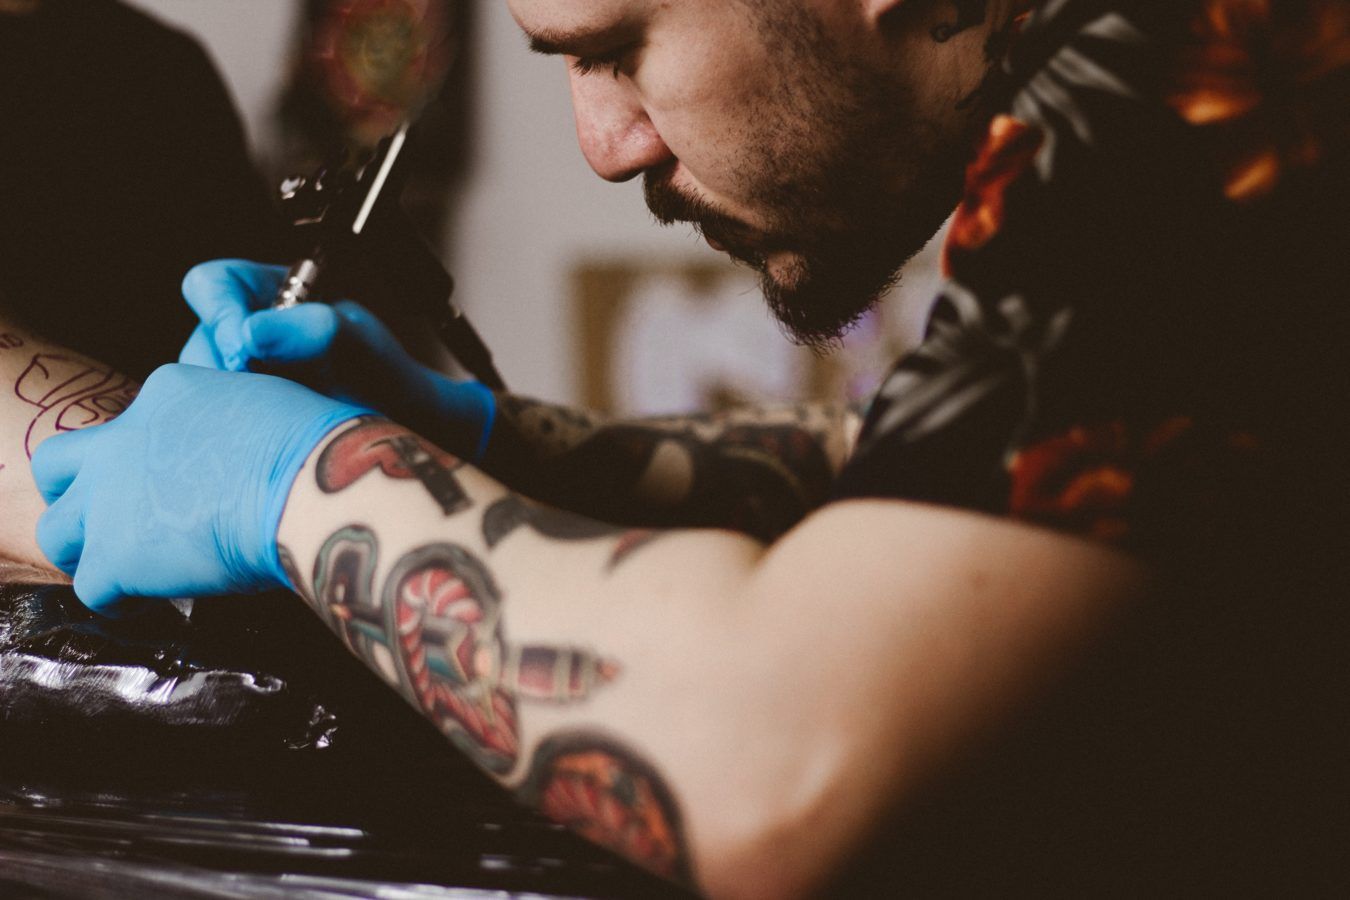 The best tattoo studios in Bali to get inked at